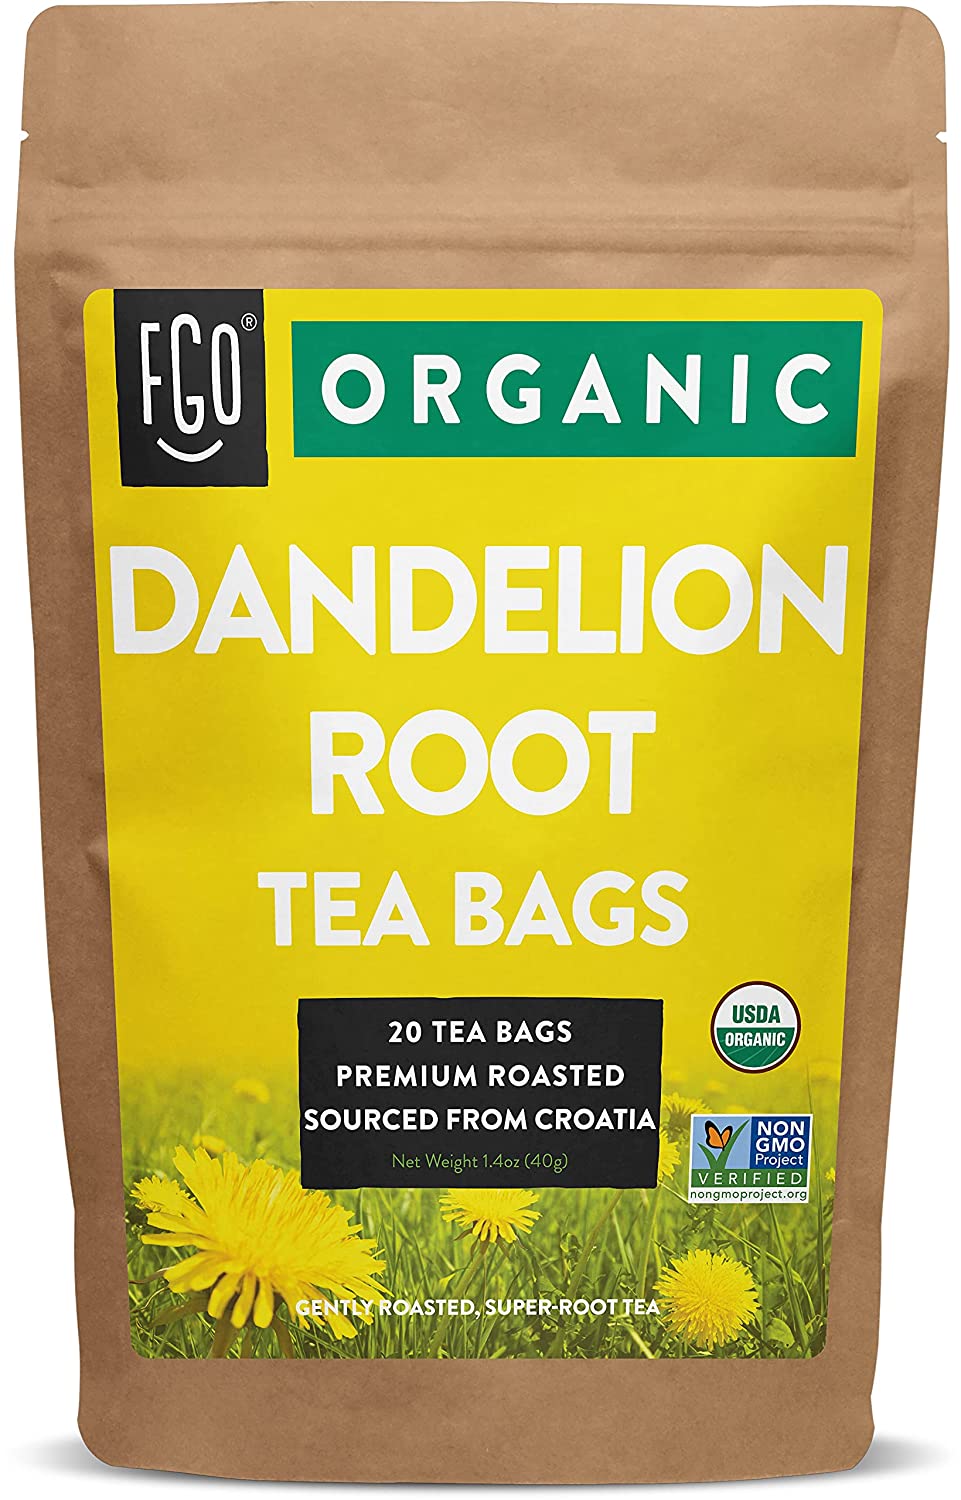 Style: Tea bags, Flavor Name: Dandelion Root, Size: 20 Count (Pack of 1)